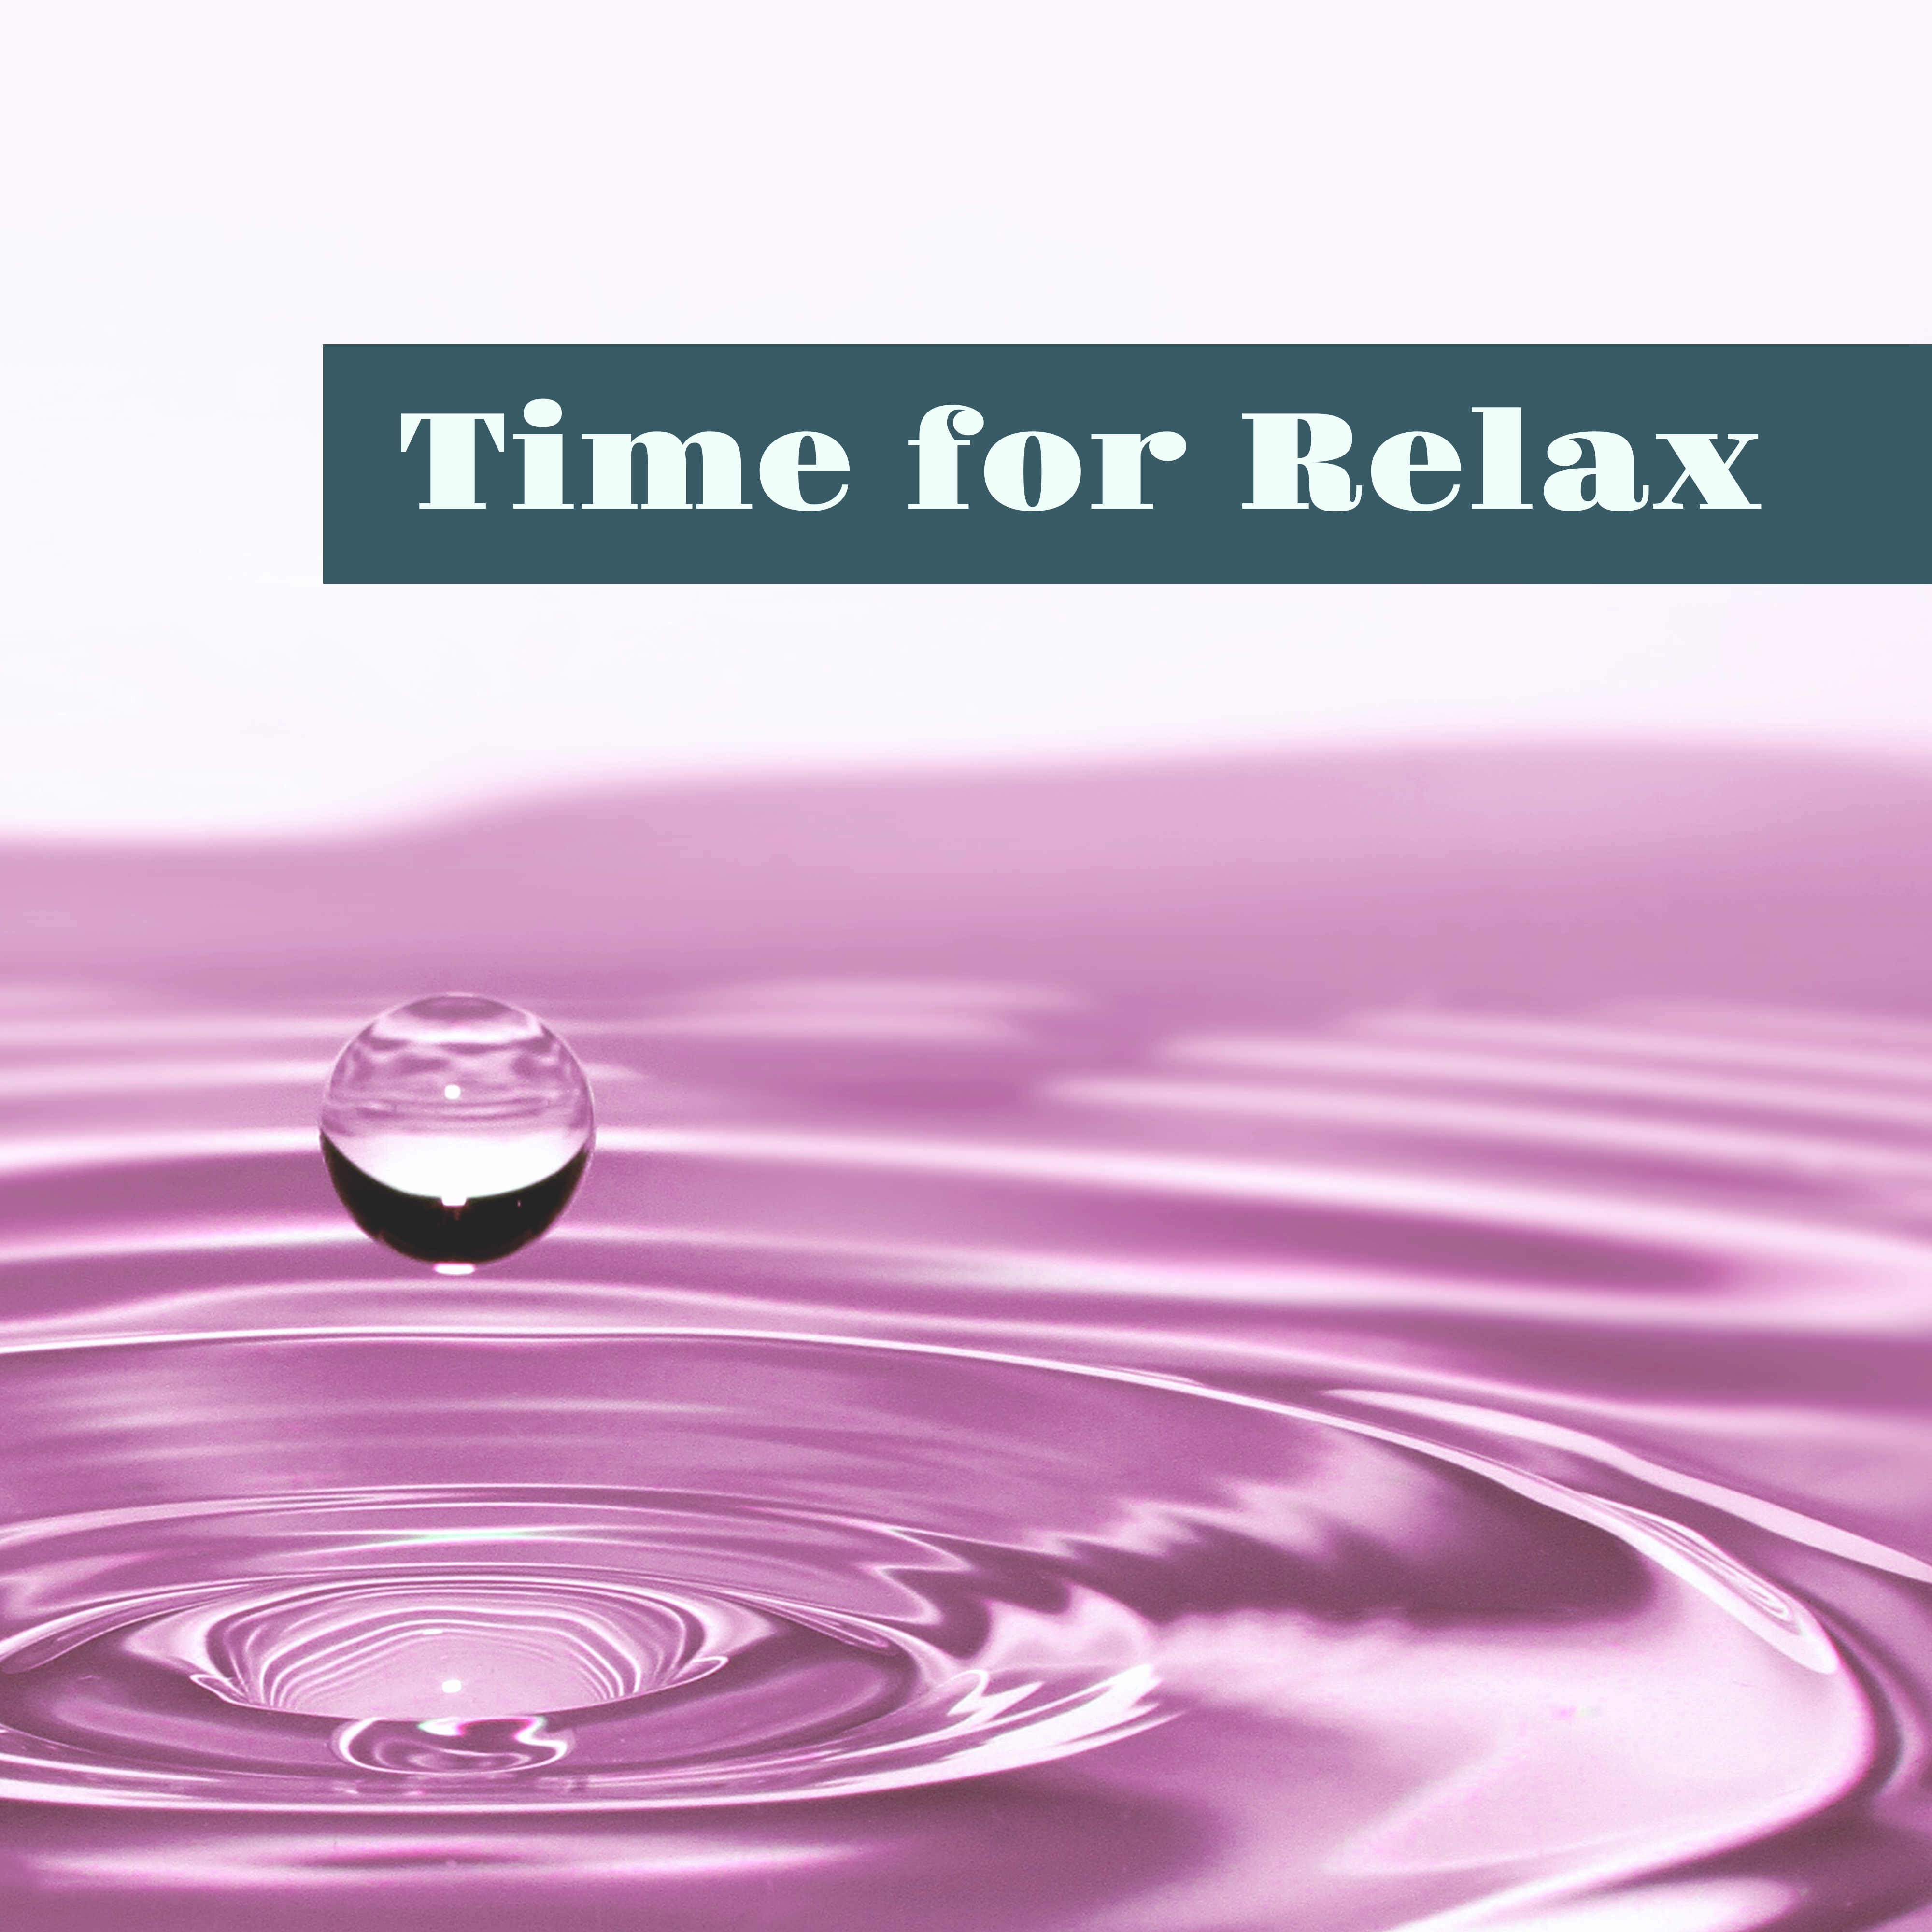 Time for Relax – Calming Sounds of Nature Help You Feel Better, Relaxing Music, Full Rest